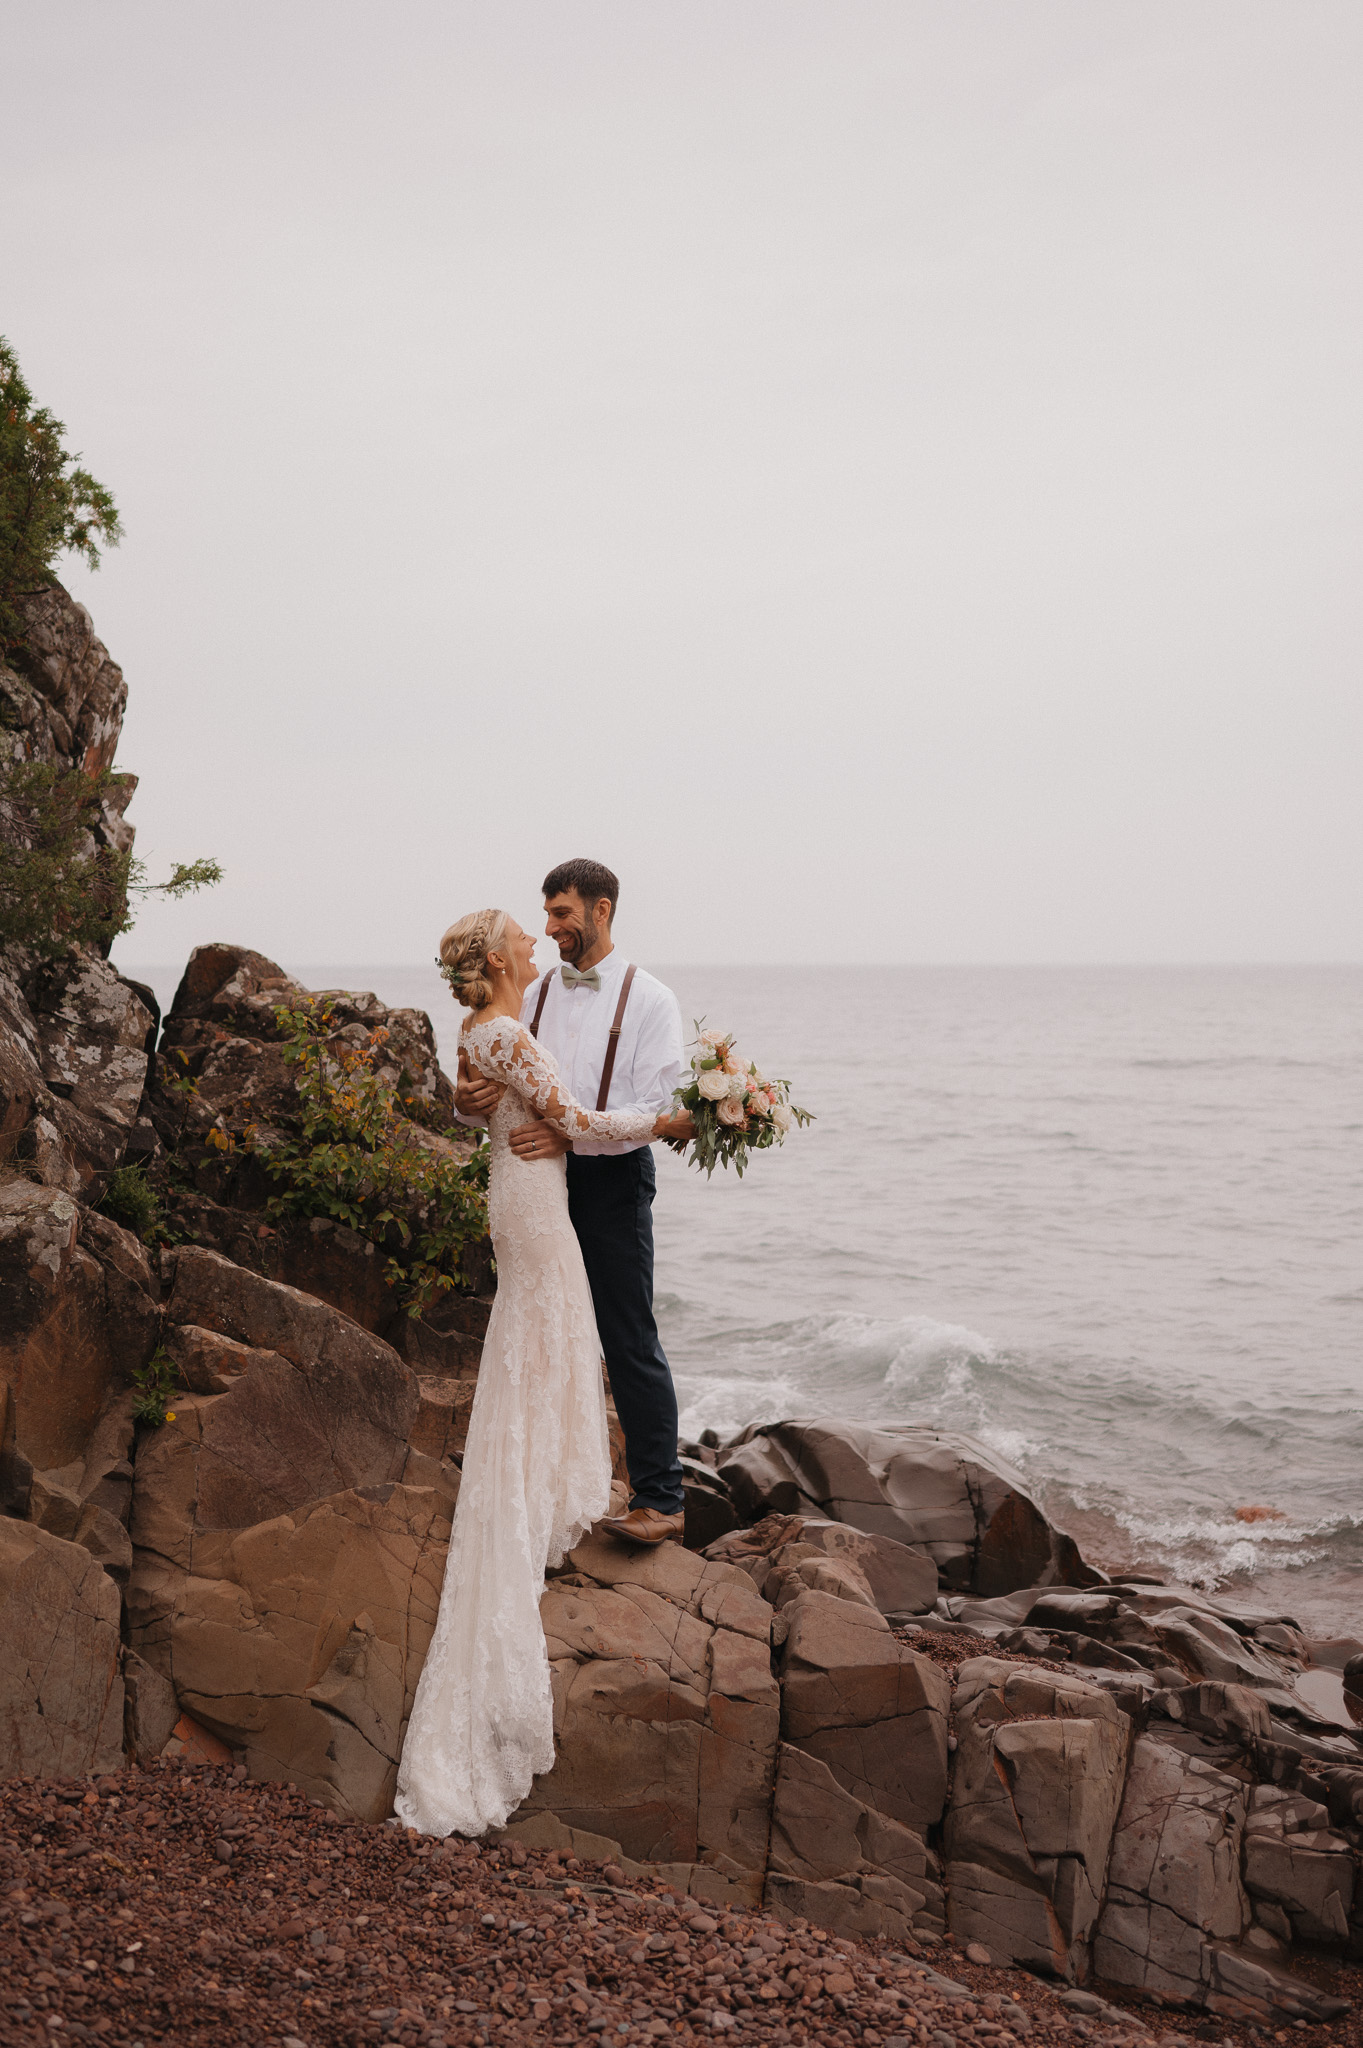 where to elope in michigan